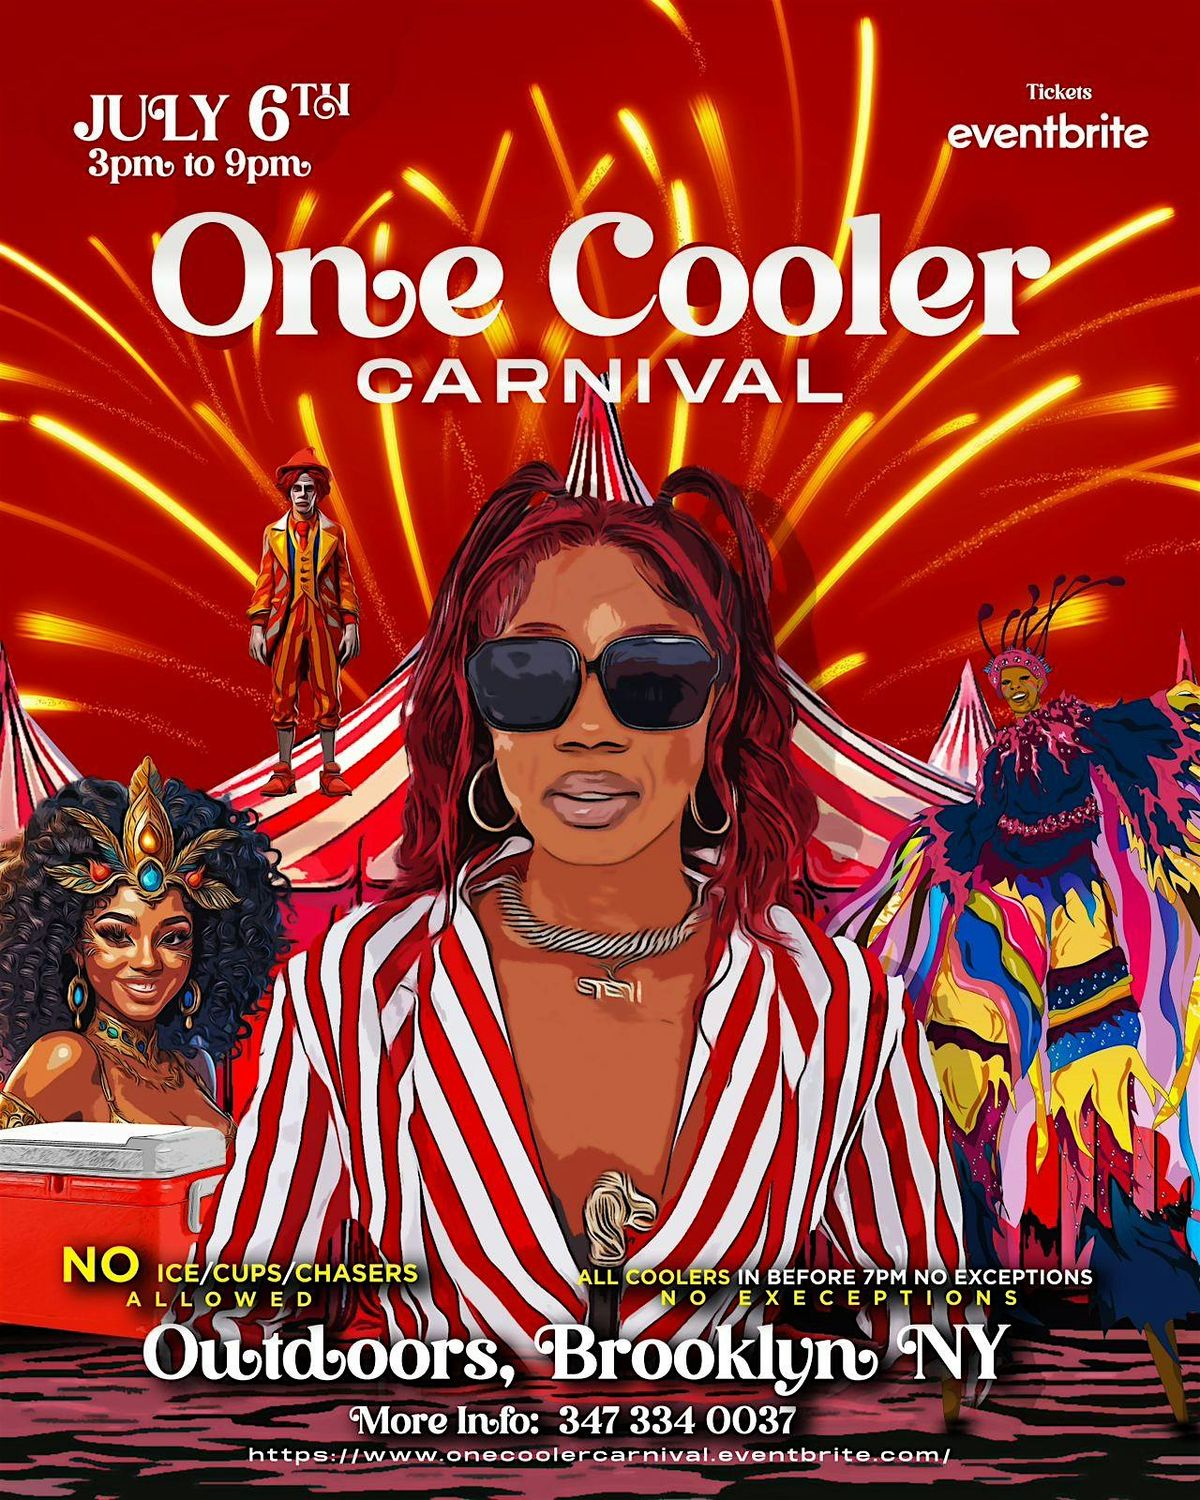 One Cooler Carnival